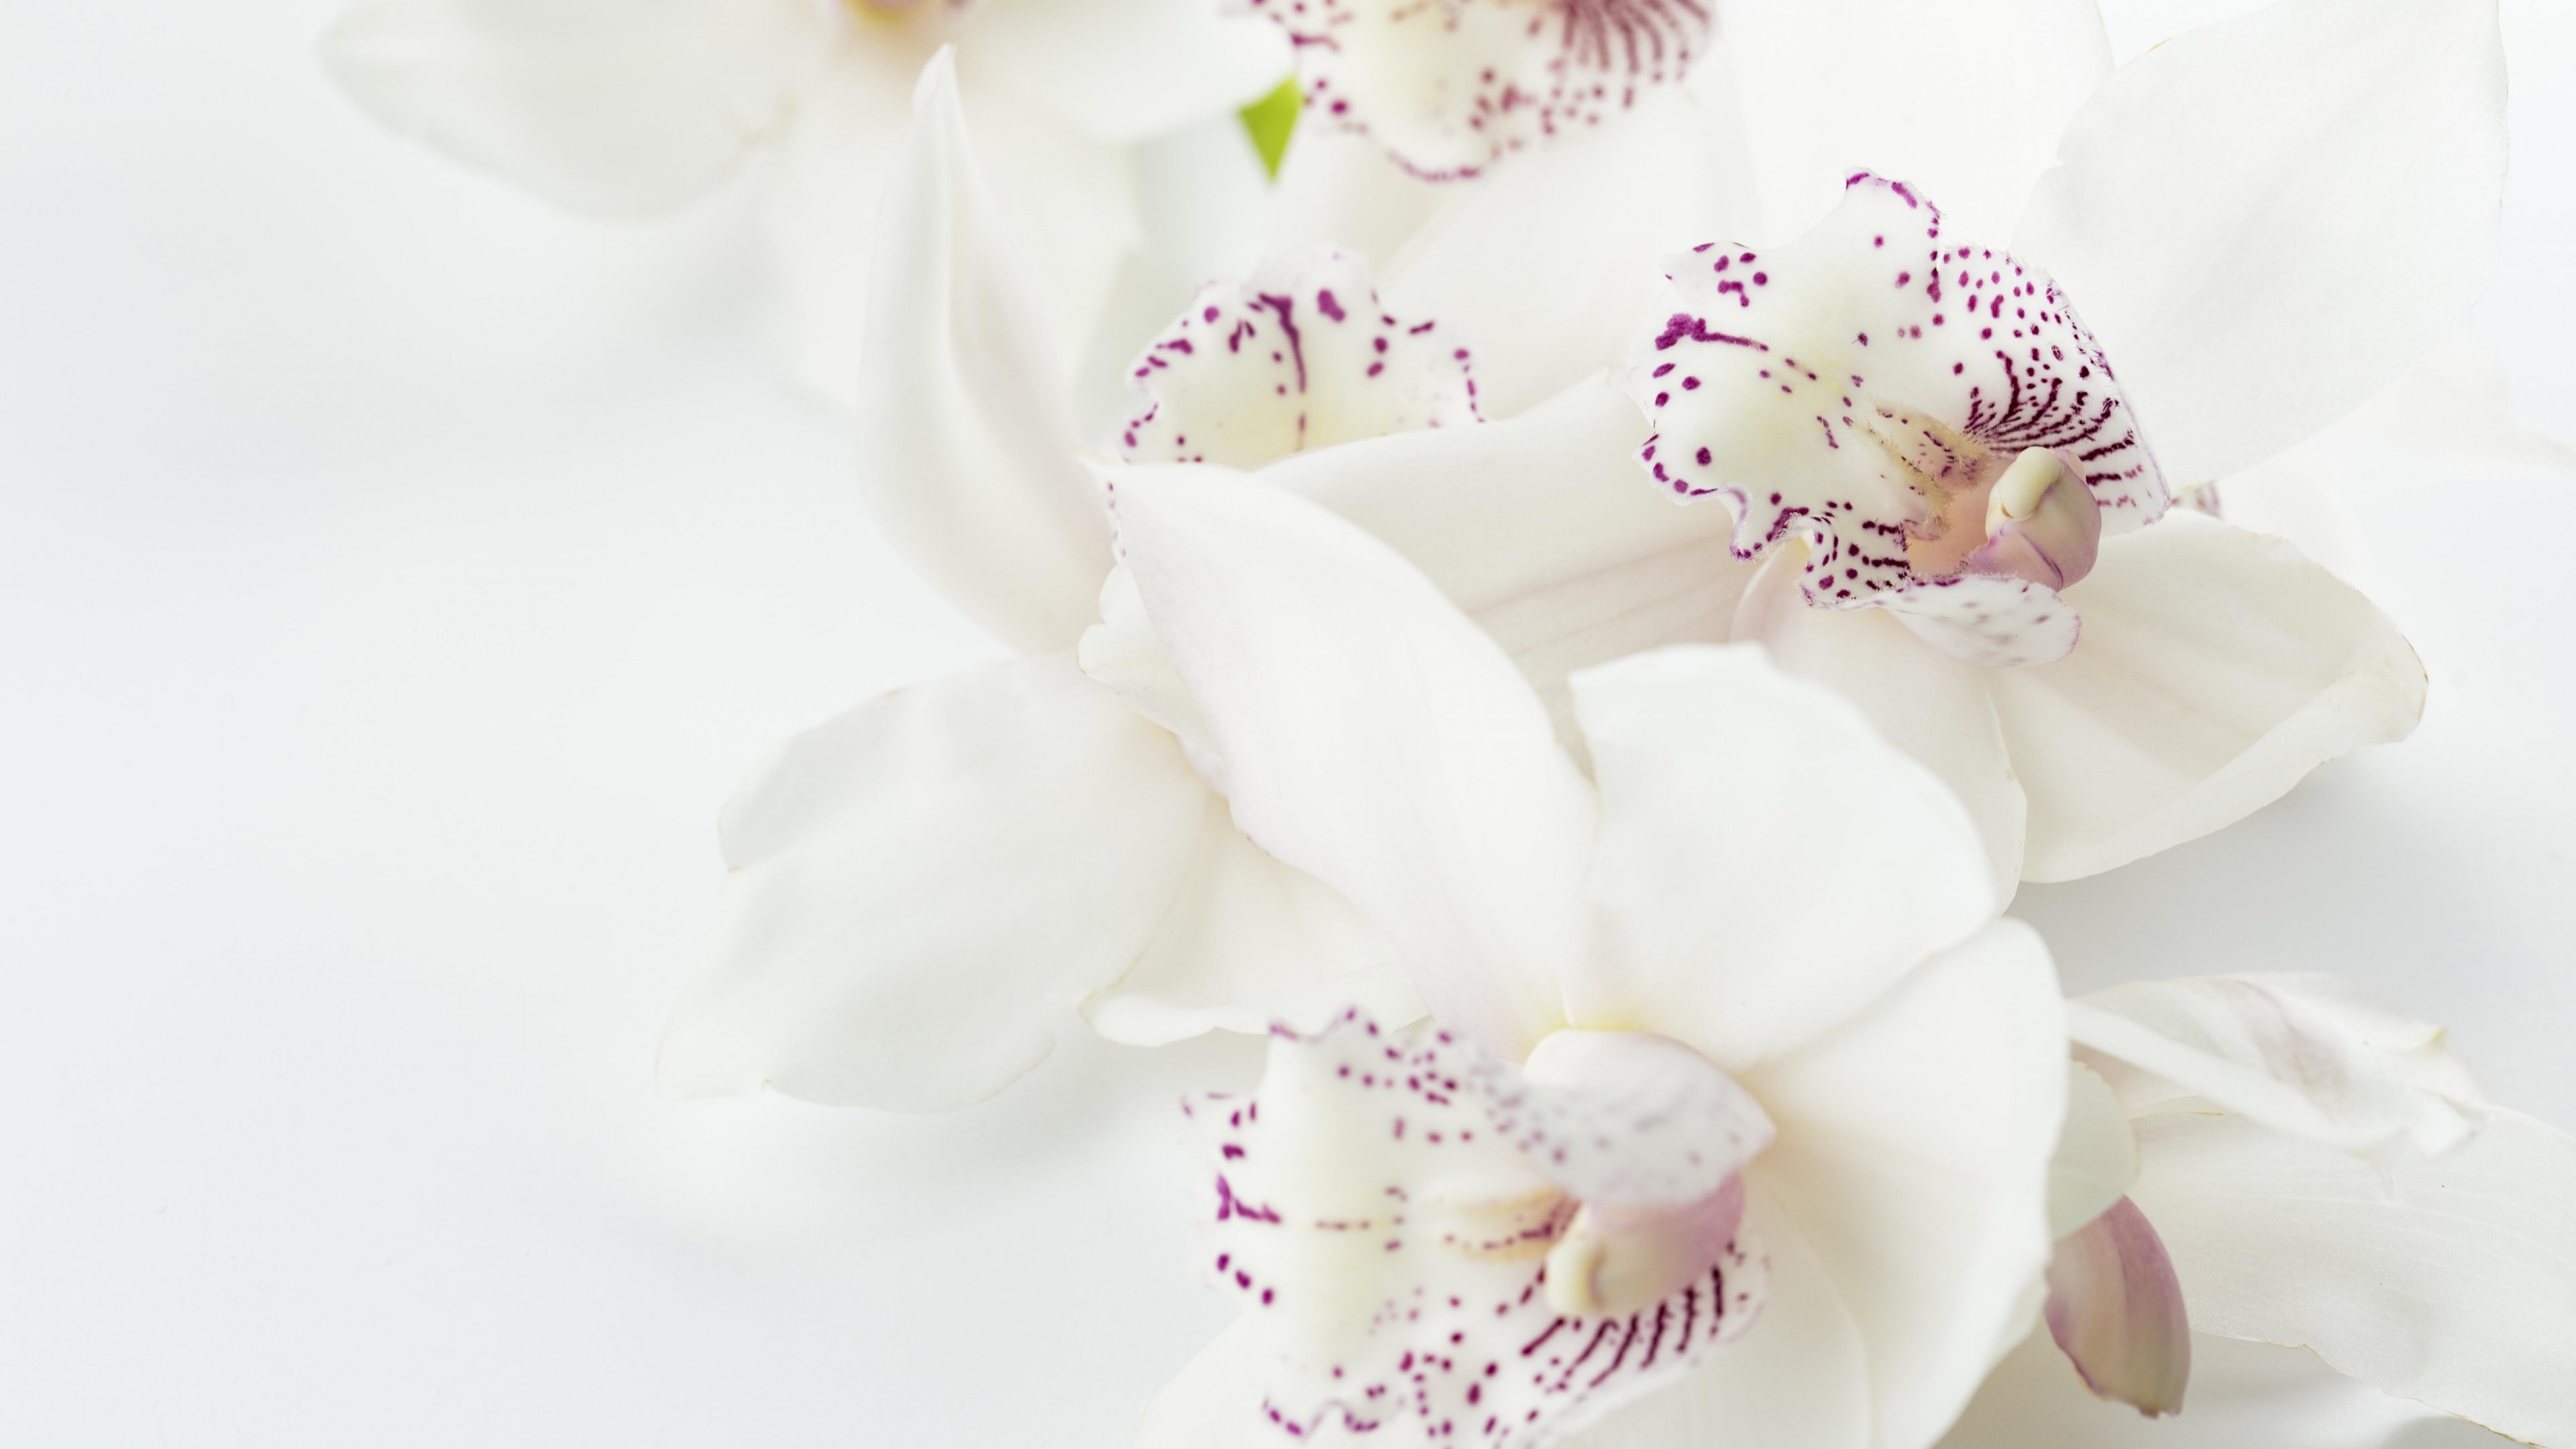 6000 Free Orchid Flower  Orchid Images  Pixabay